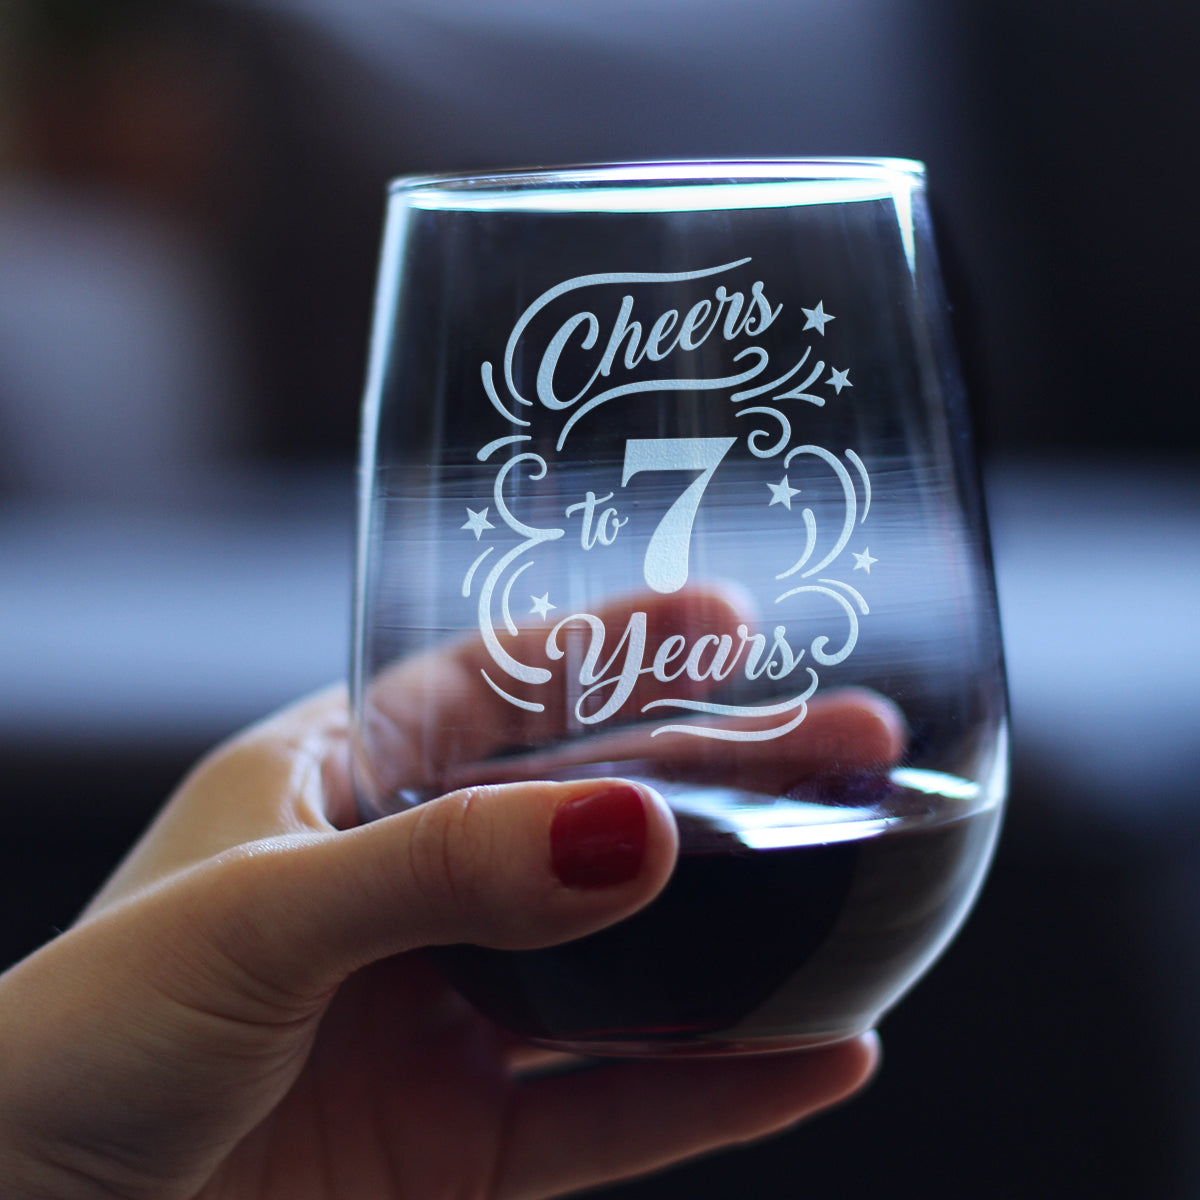 Cheers to 7 Years - Stemless Wine Glass Gifts for Women &amp; Men - 7th Anniversary Party Decor - Large 17 Oz Glasses